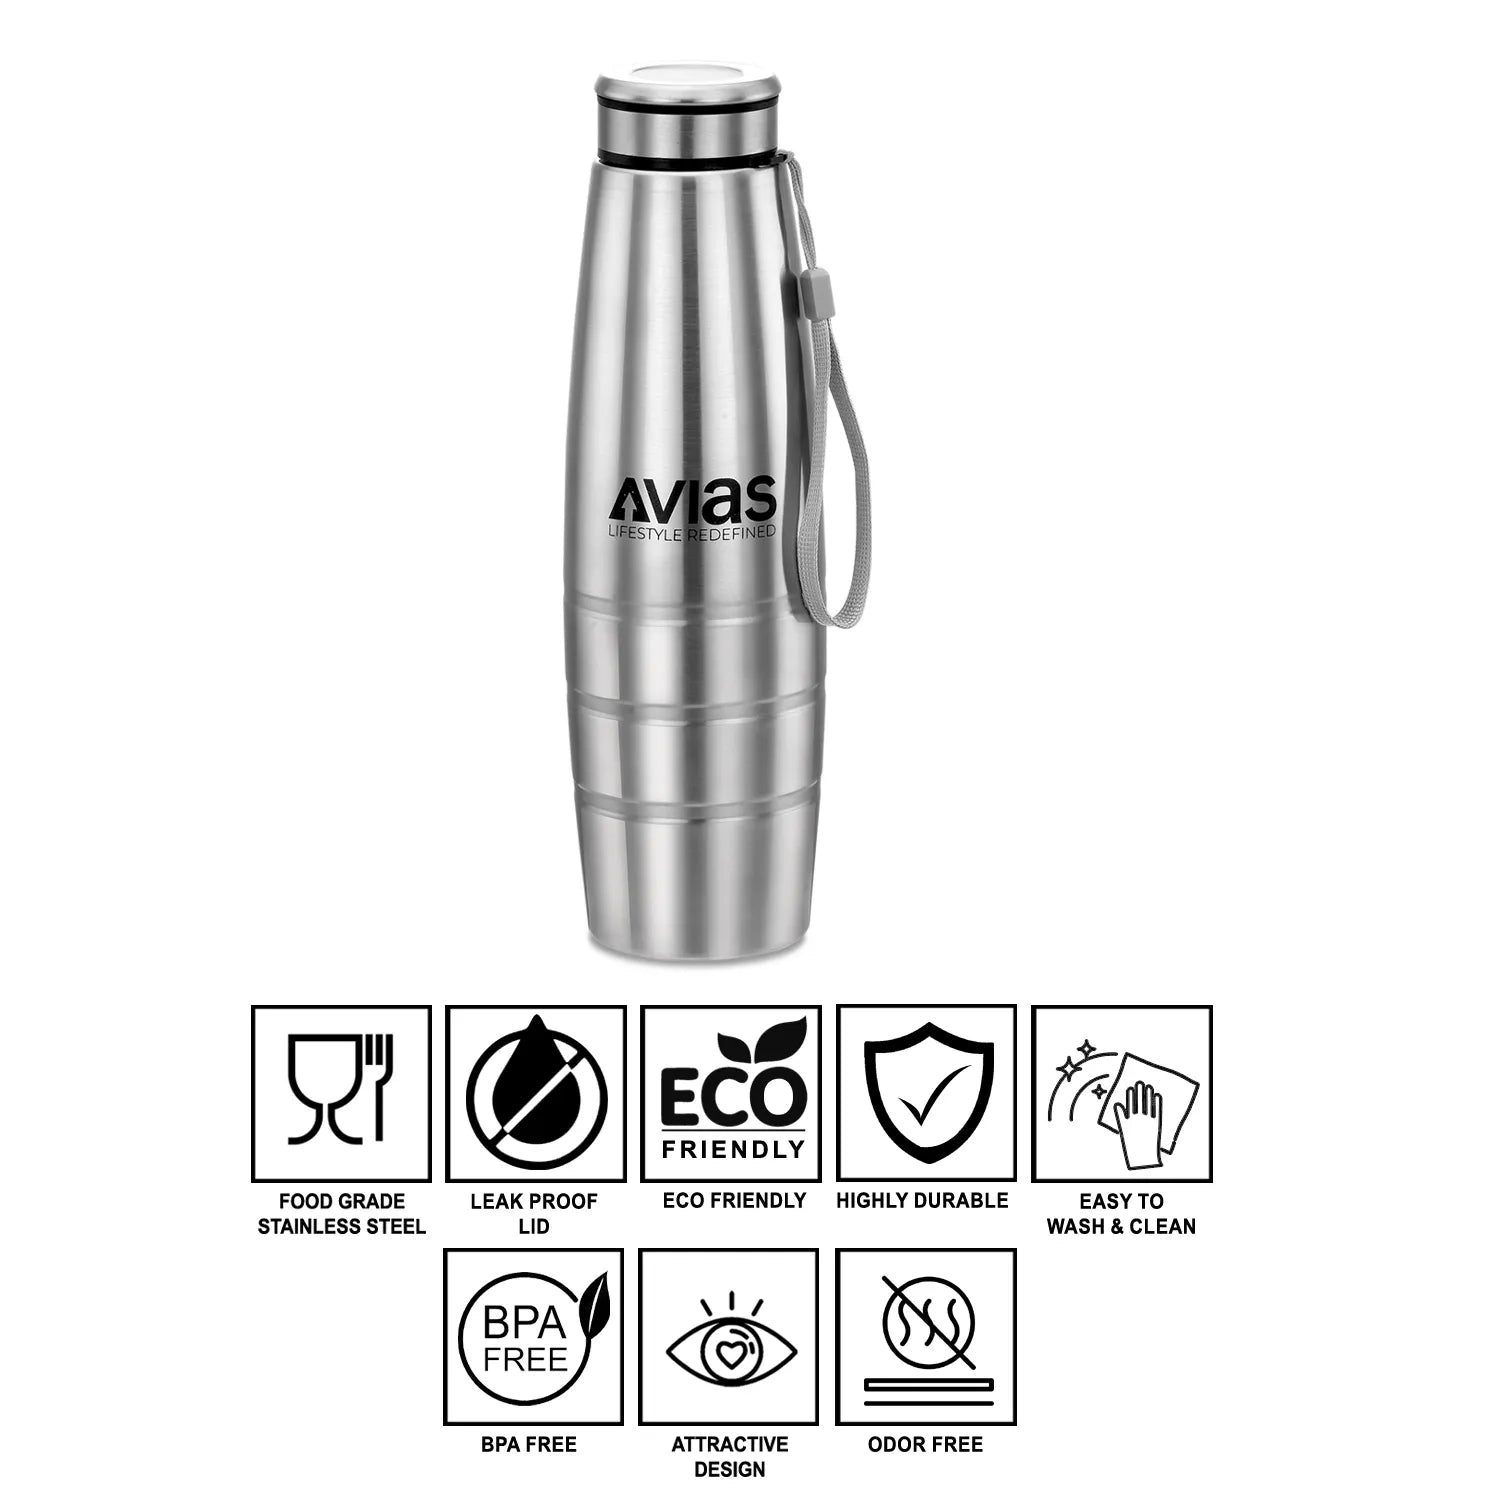 AVIAS Office Combo - Premia SS Bottle 1000ml features